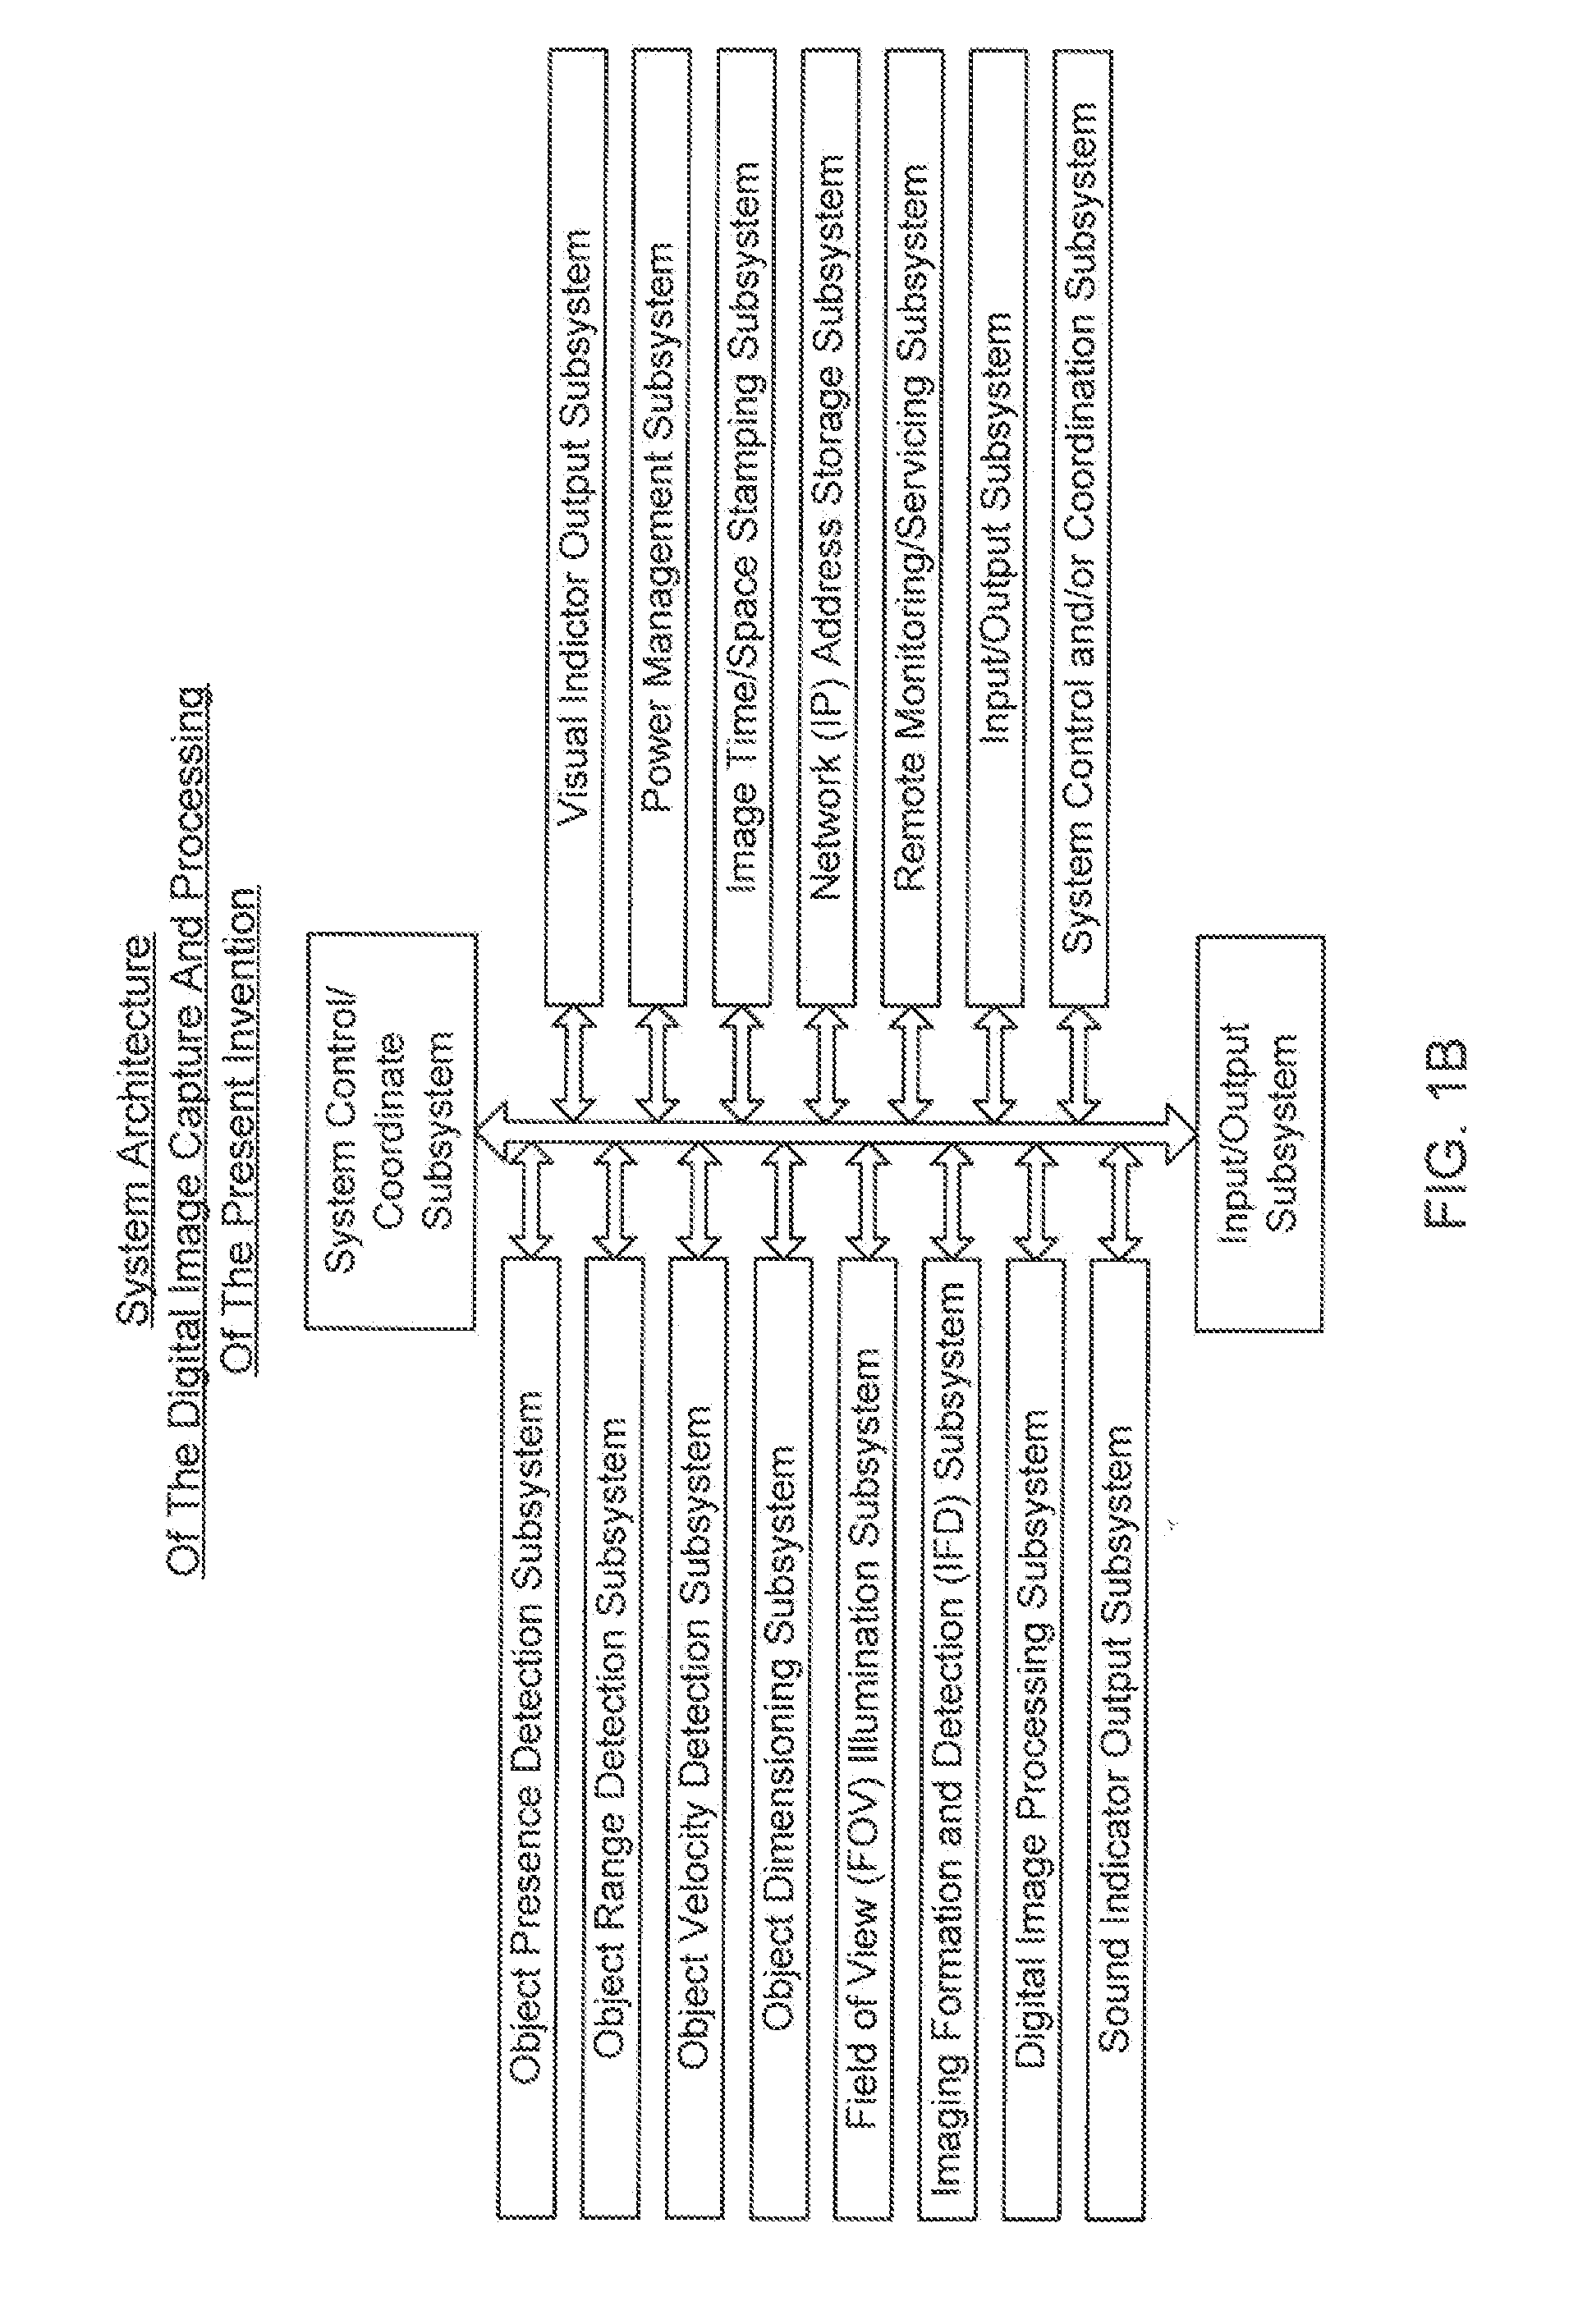 Digital image capture and processing system supporting multiple third party code plug-ins with configuration files having conditional programming logic controlling the chaining of multiple third-party plug-ins